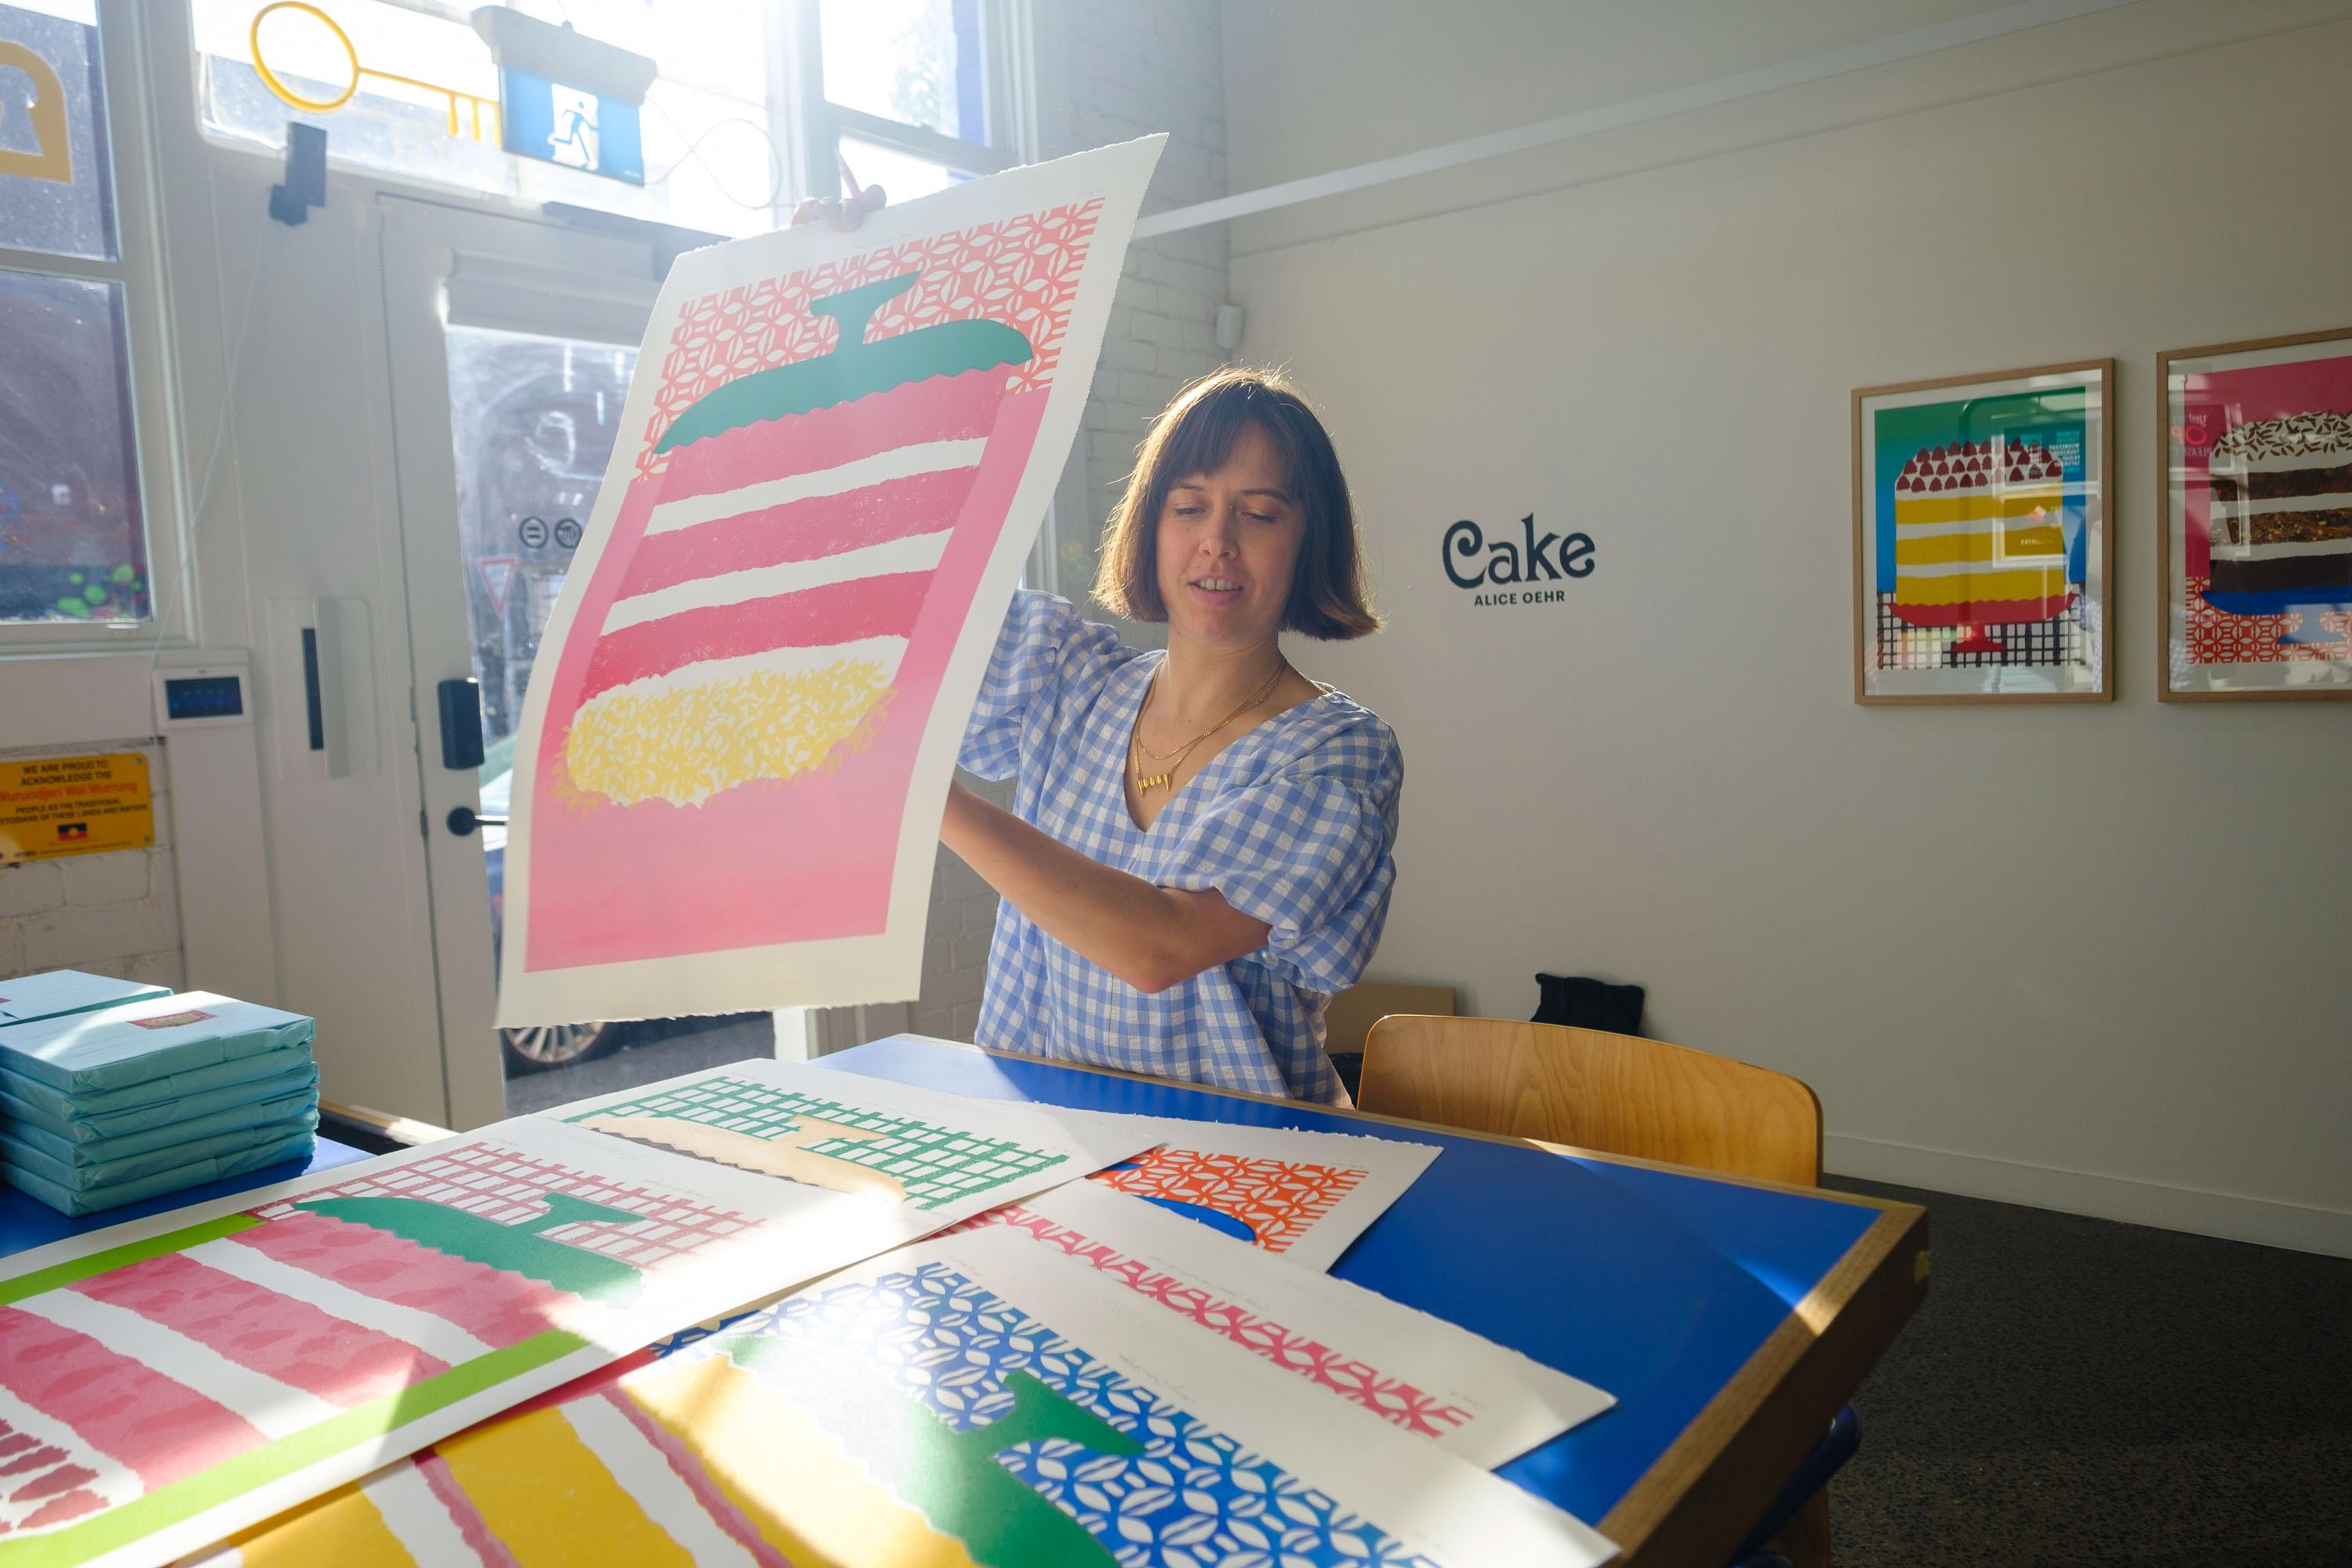 In this series Alice explores the graphic qualities of cakes and the romance of cake shops using a combination of printmaking techniques. Working with layered silkscreens, stencilling, risograph printing, stamping and collage, this new body of work